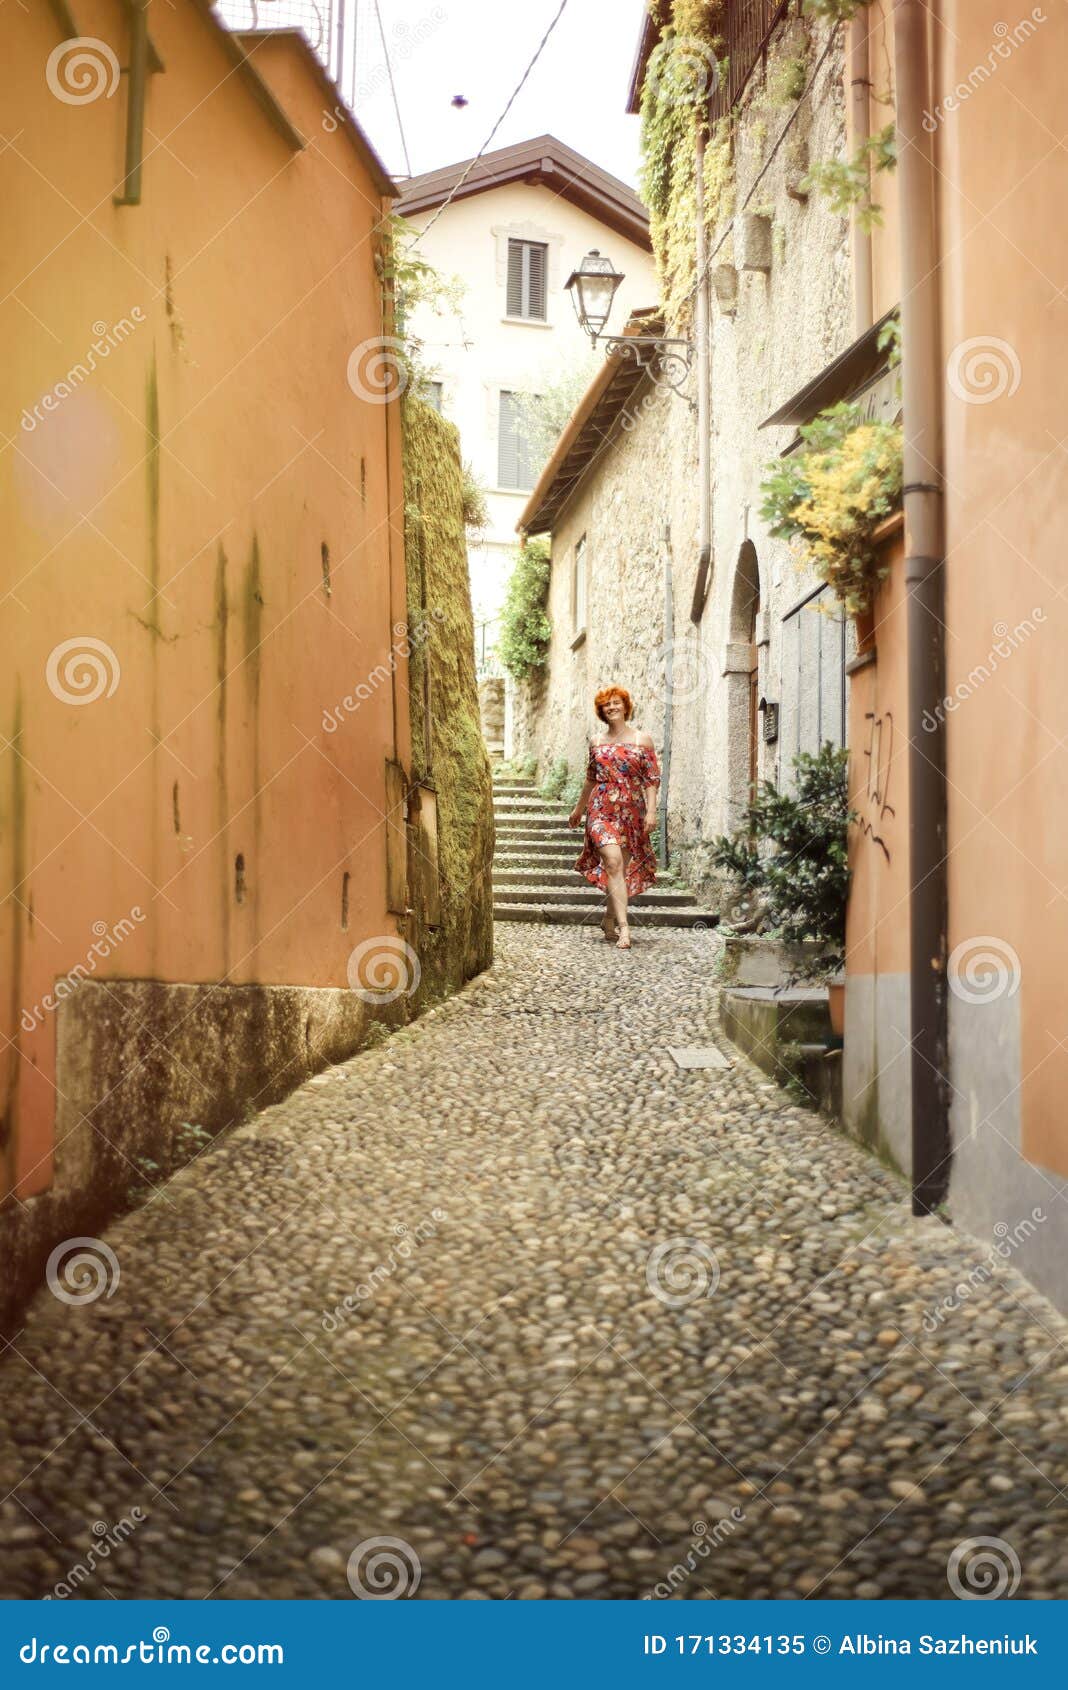 Red Haired Woman in Red Dress Walking on Stone Street in Italian Small ...